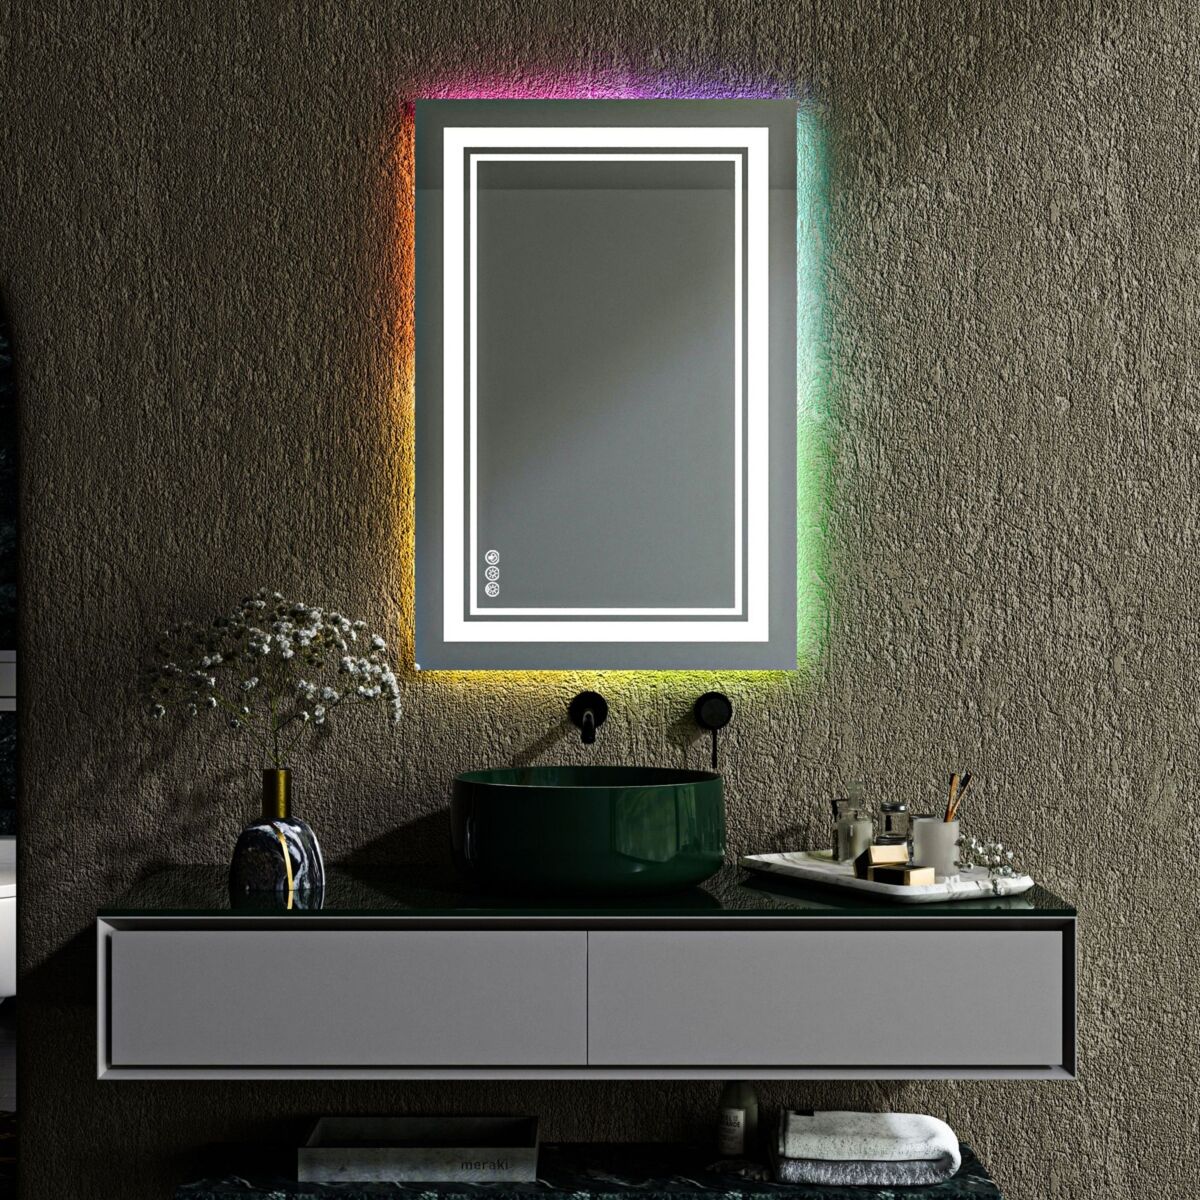 Toolkiss Multiple Light Modes Vanity Mirror , Anti-Fog Dimmable Led Bathroom Mirror in Rgb Backlit + Front Lighted - Bright purple